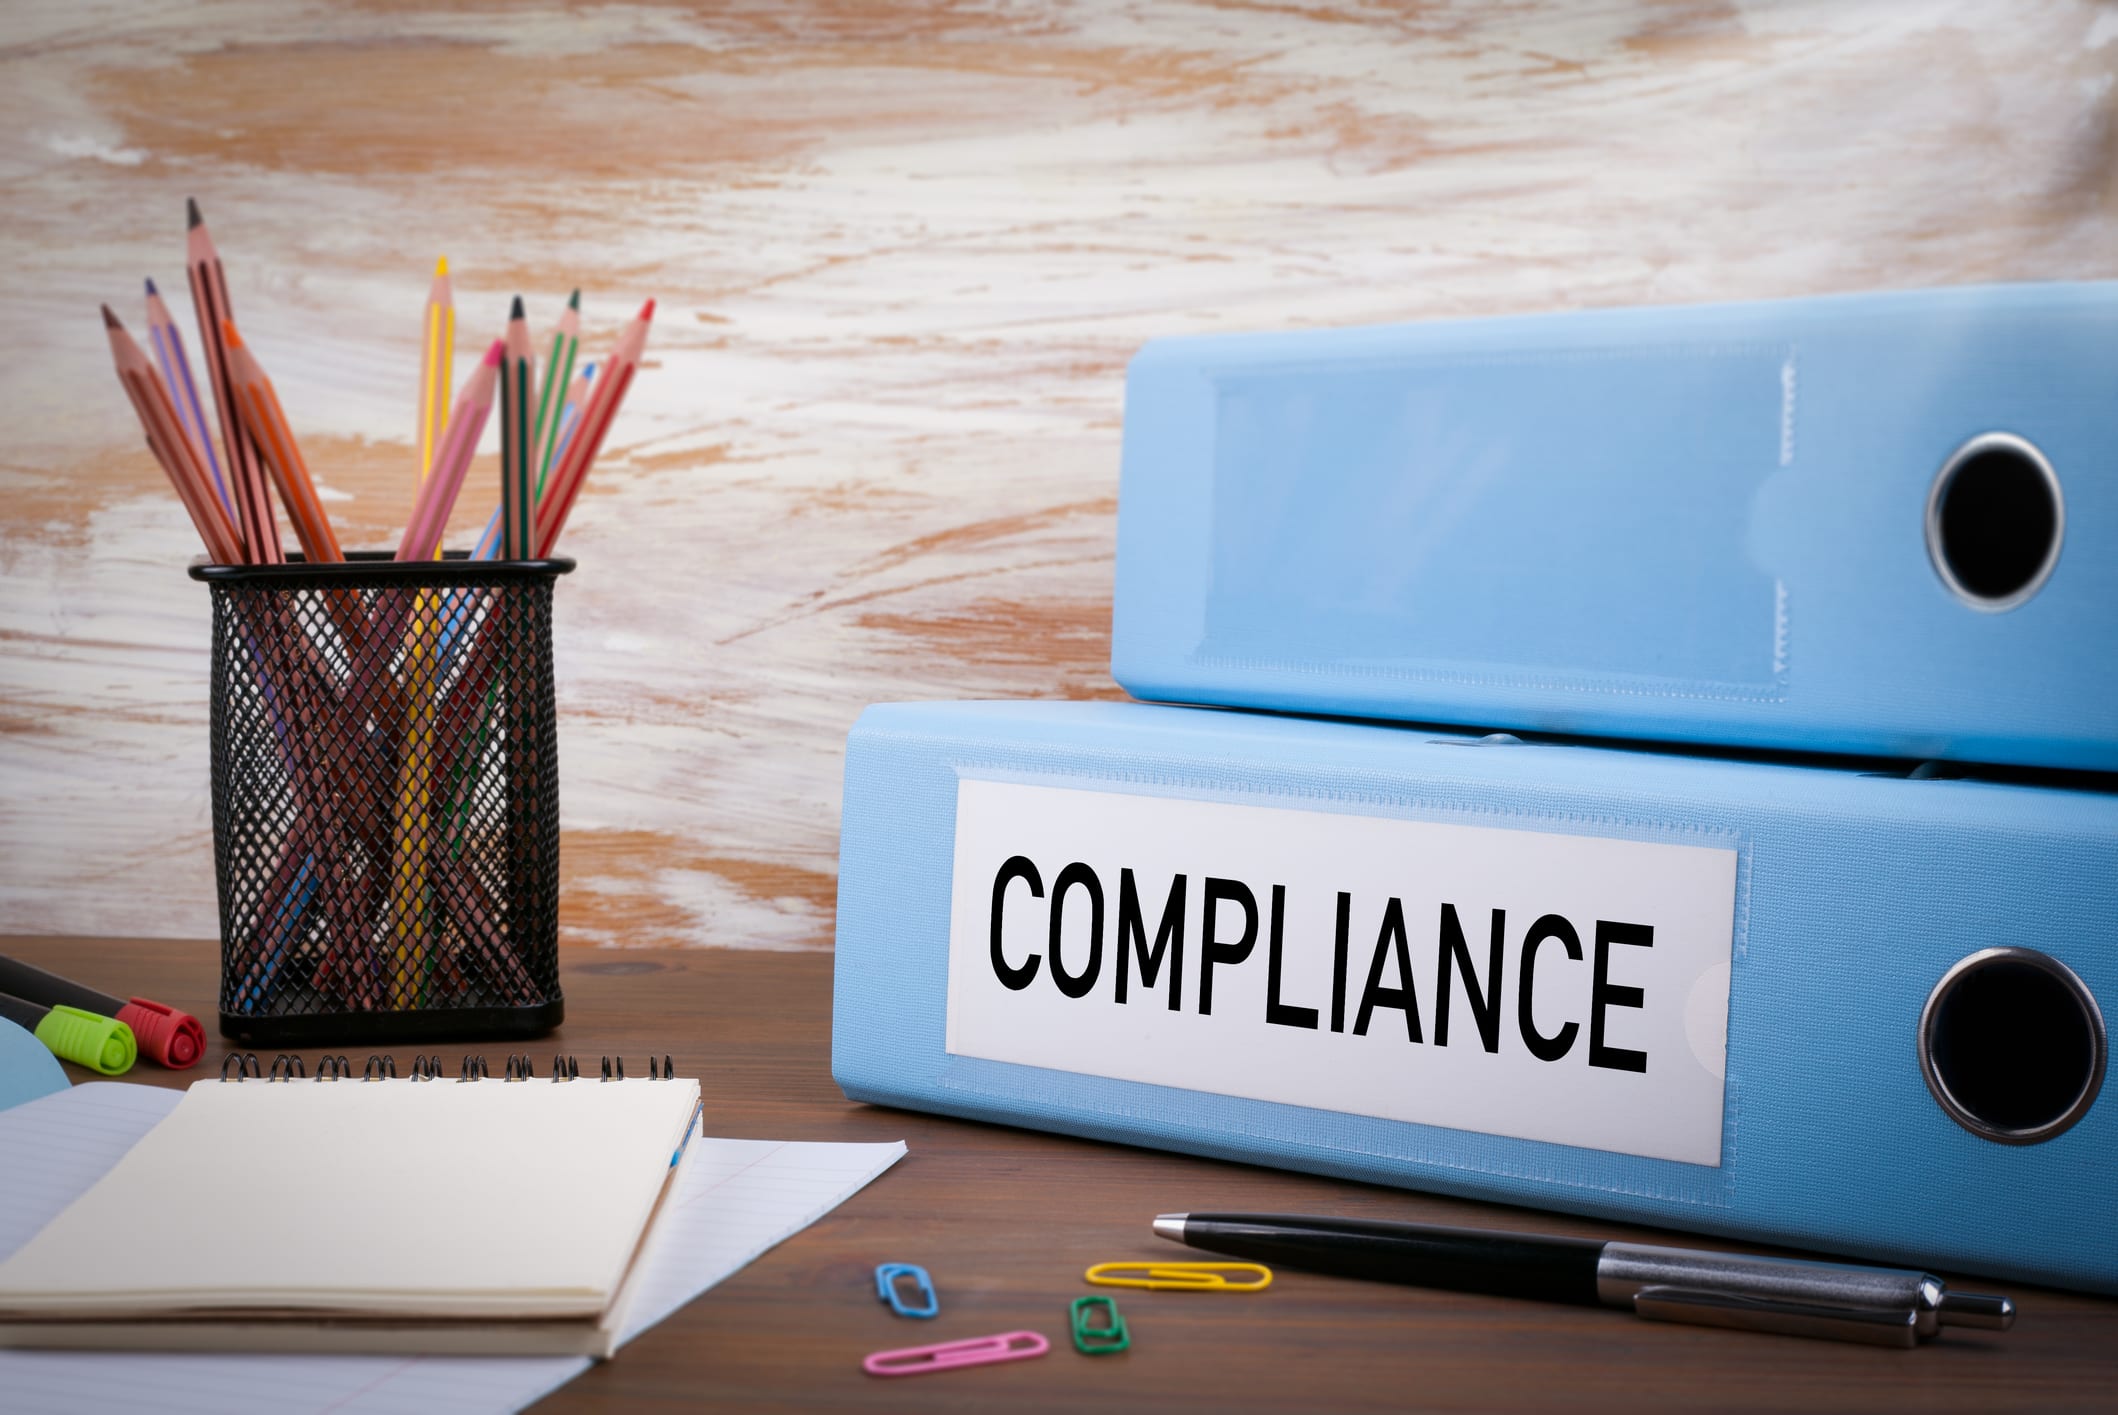 Maintain Pharmacy Compliance With 5 Easy Steps